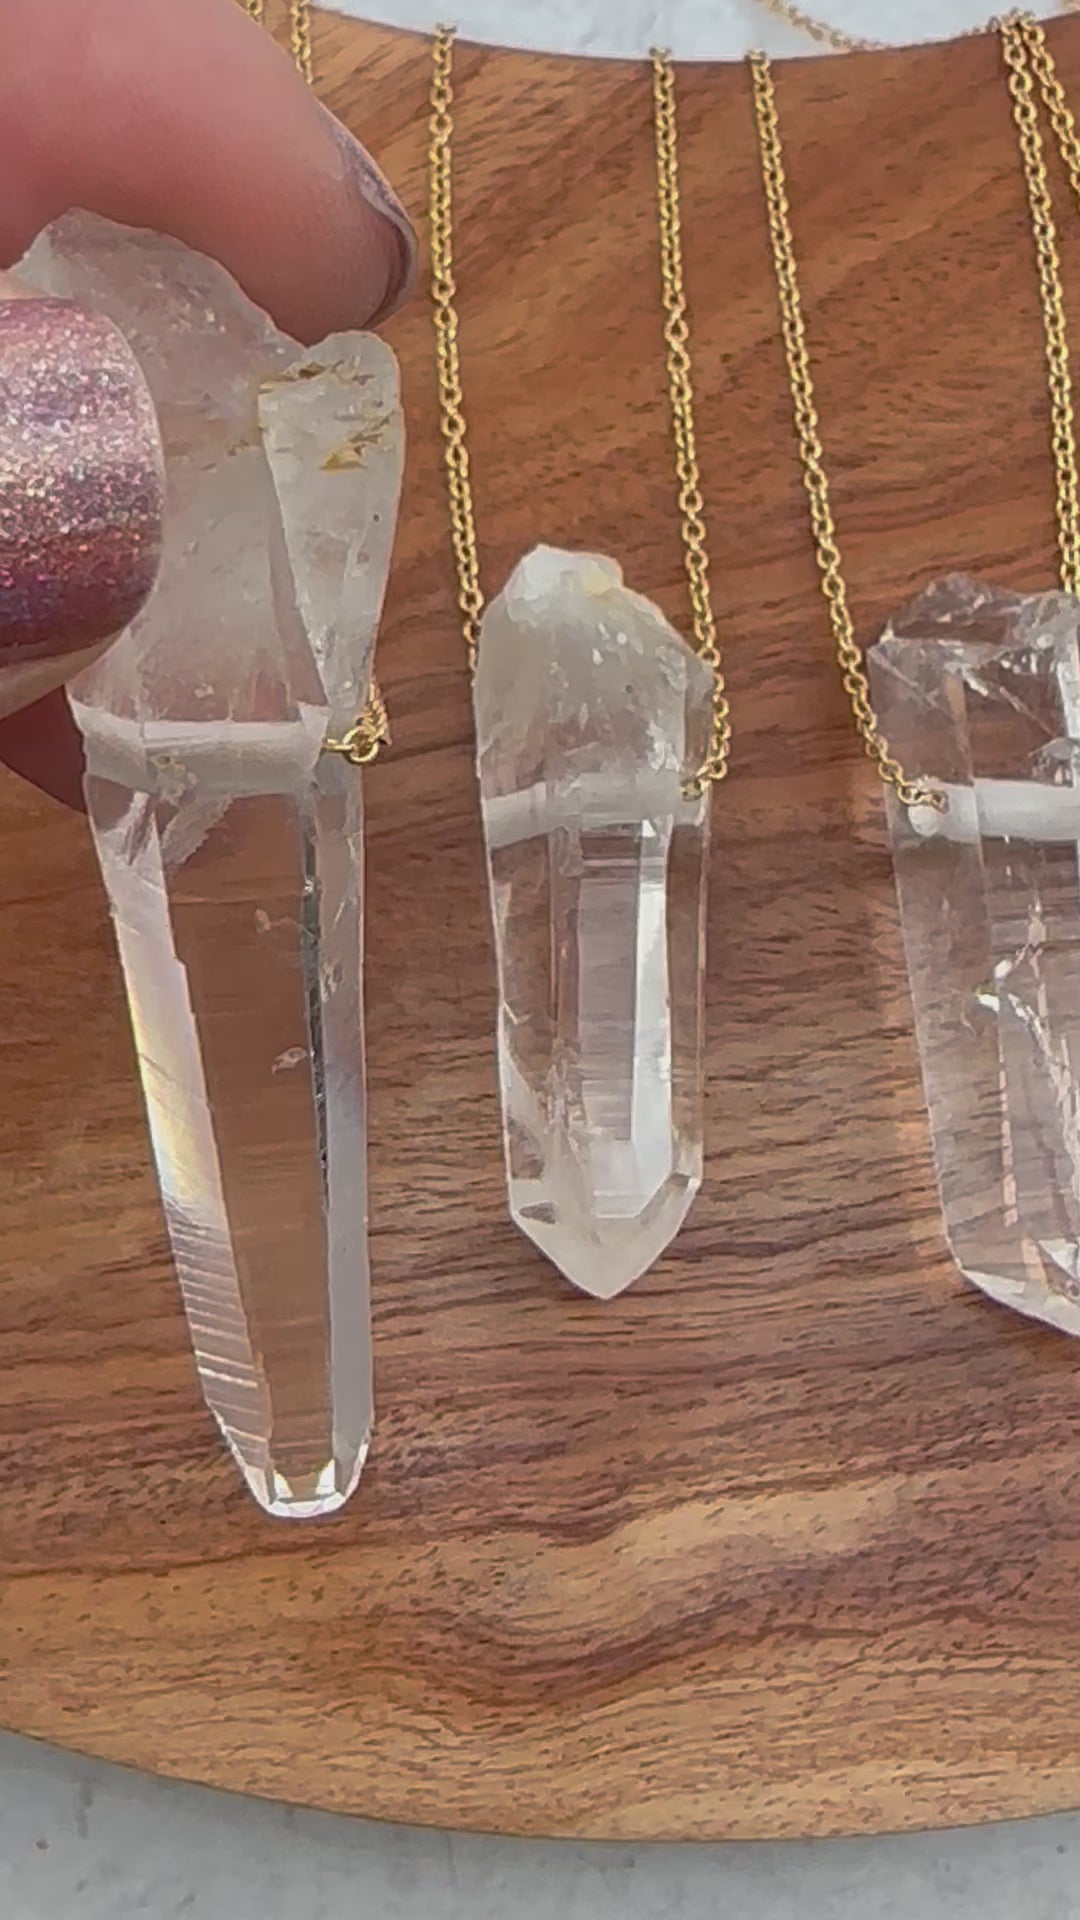 Columbian Lemurian Point Crystal Necklace - You Choose -